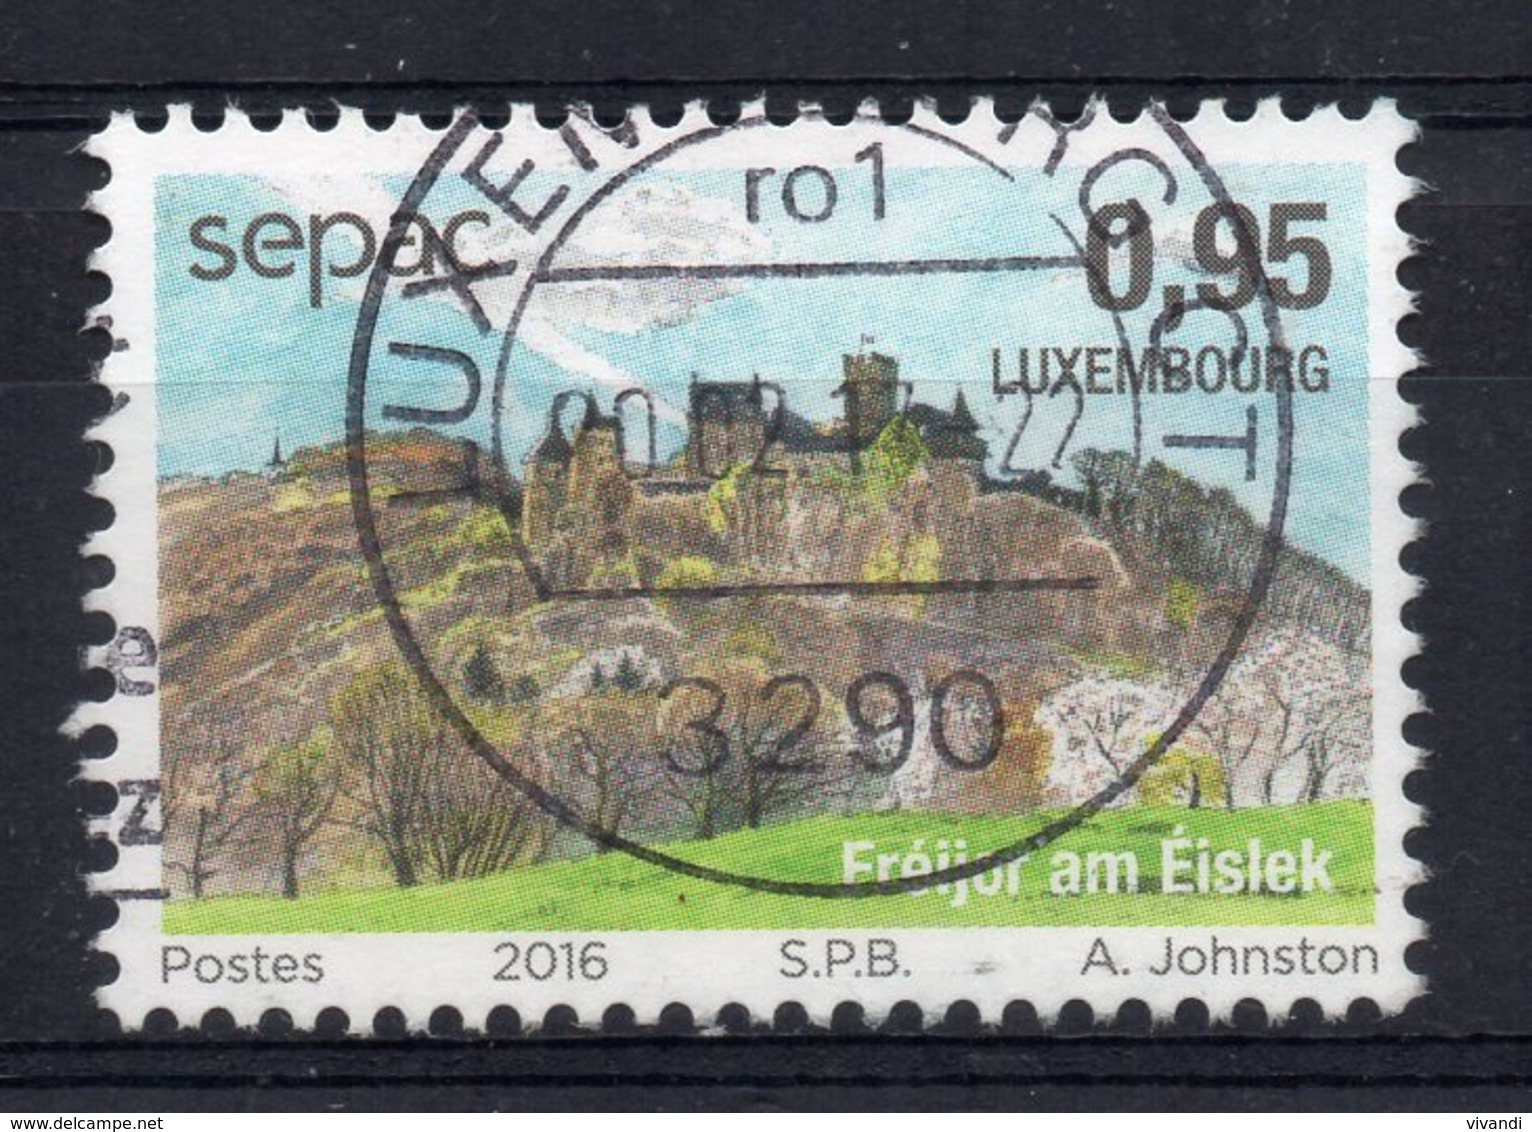 Luxembourg - 2016 - Sepac - Used - Oblitérés